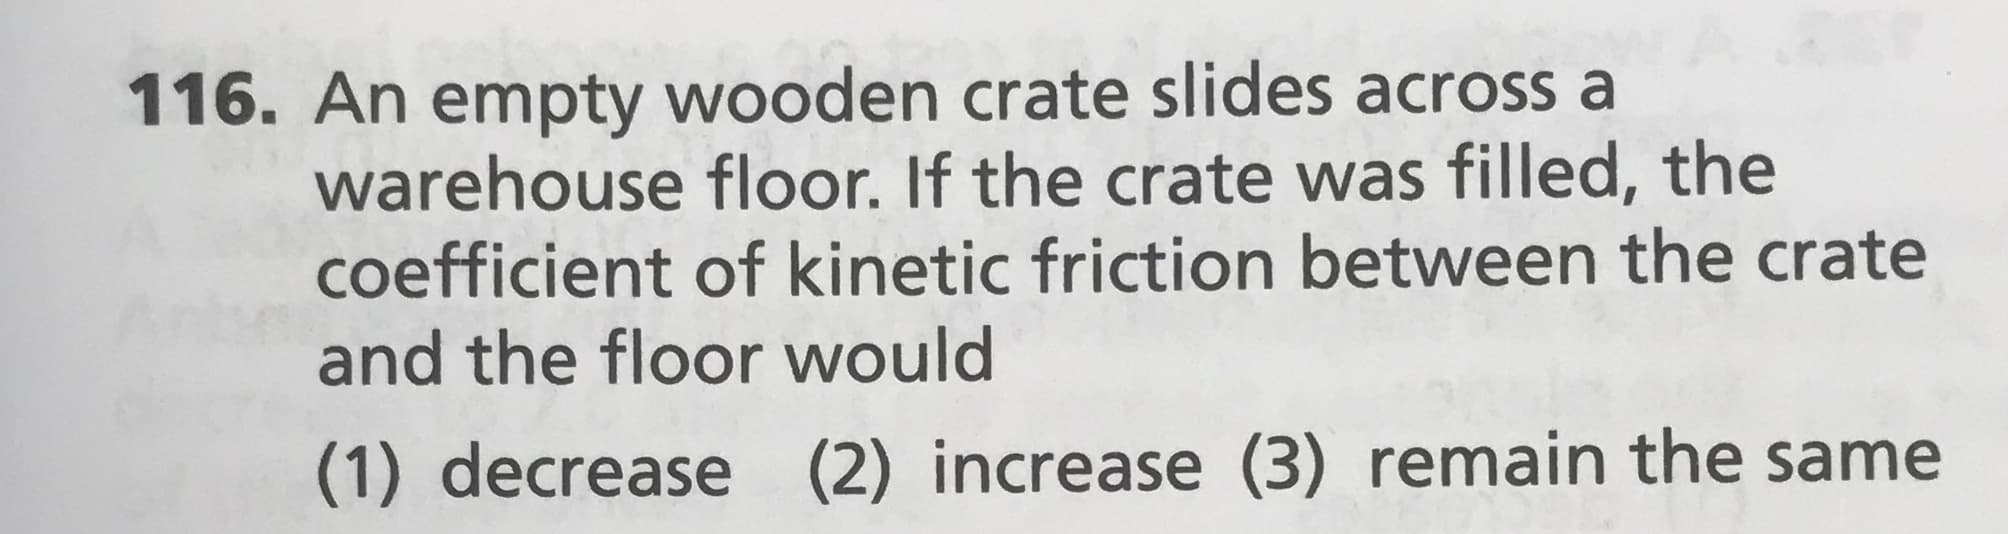 116. An empty wooden crate slides across a
warehouse floor. If the crate was filled, the
coefficient of kinetic friction between the crate
and the floor would
(2) increase (3) remain the same
(1) decrease
